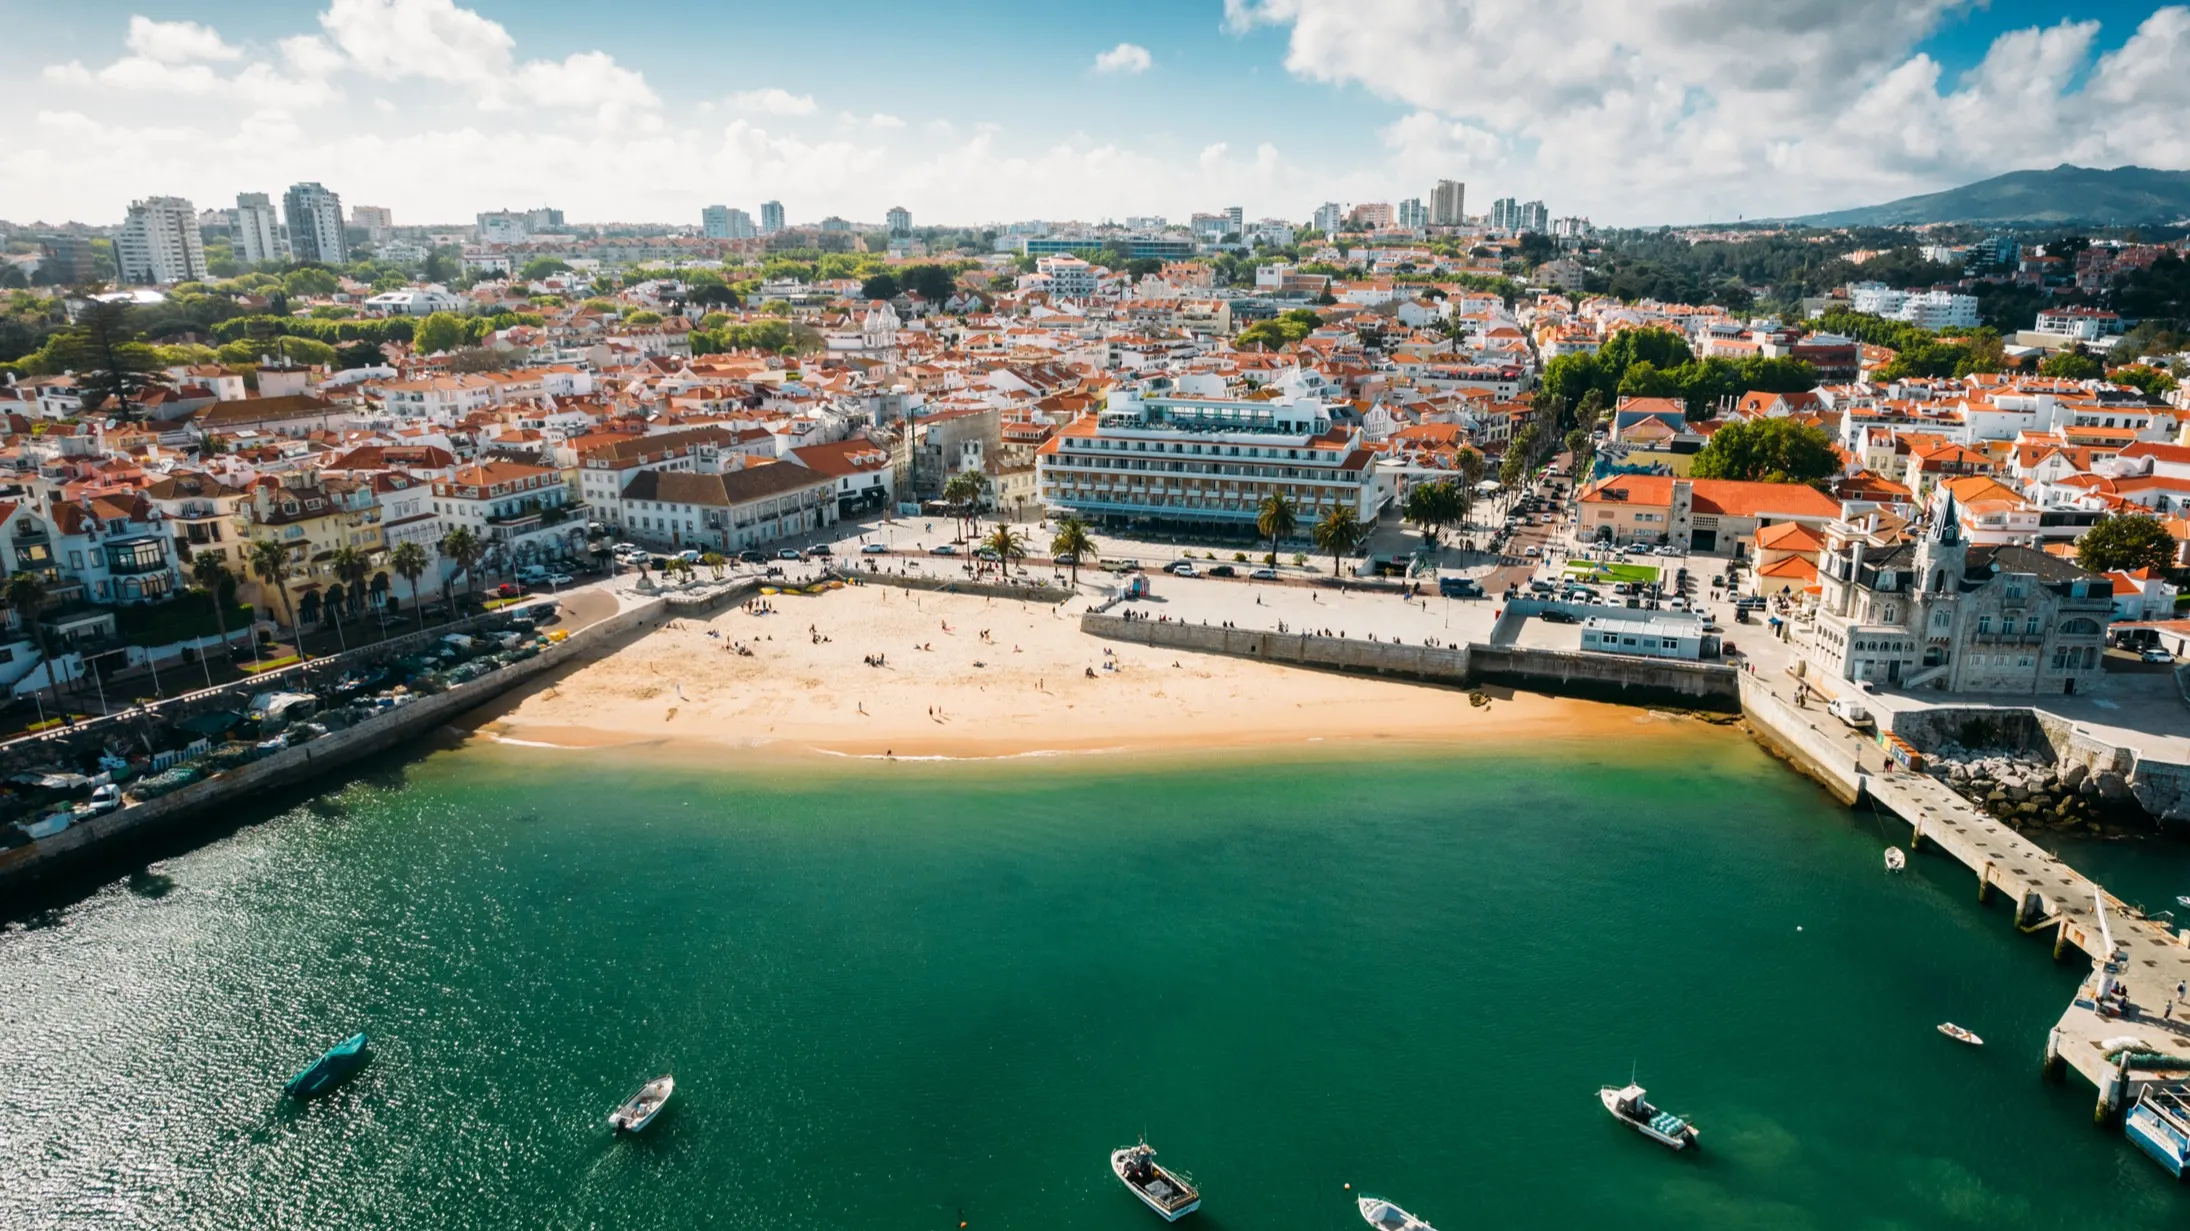 Jeff Opdyke moved to the seaside town of Cascais, Portugal.